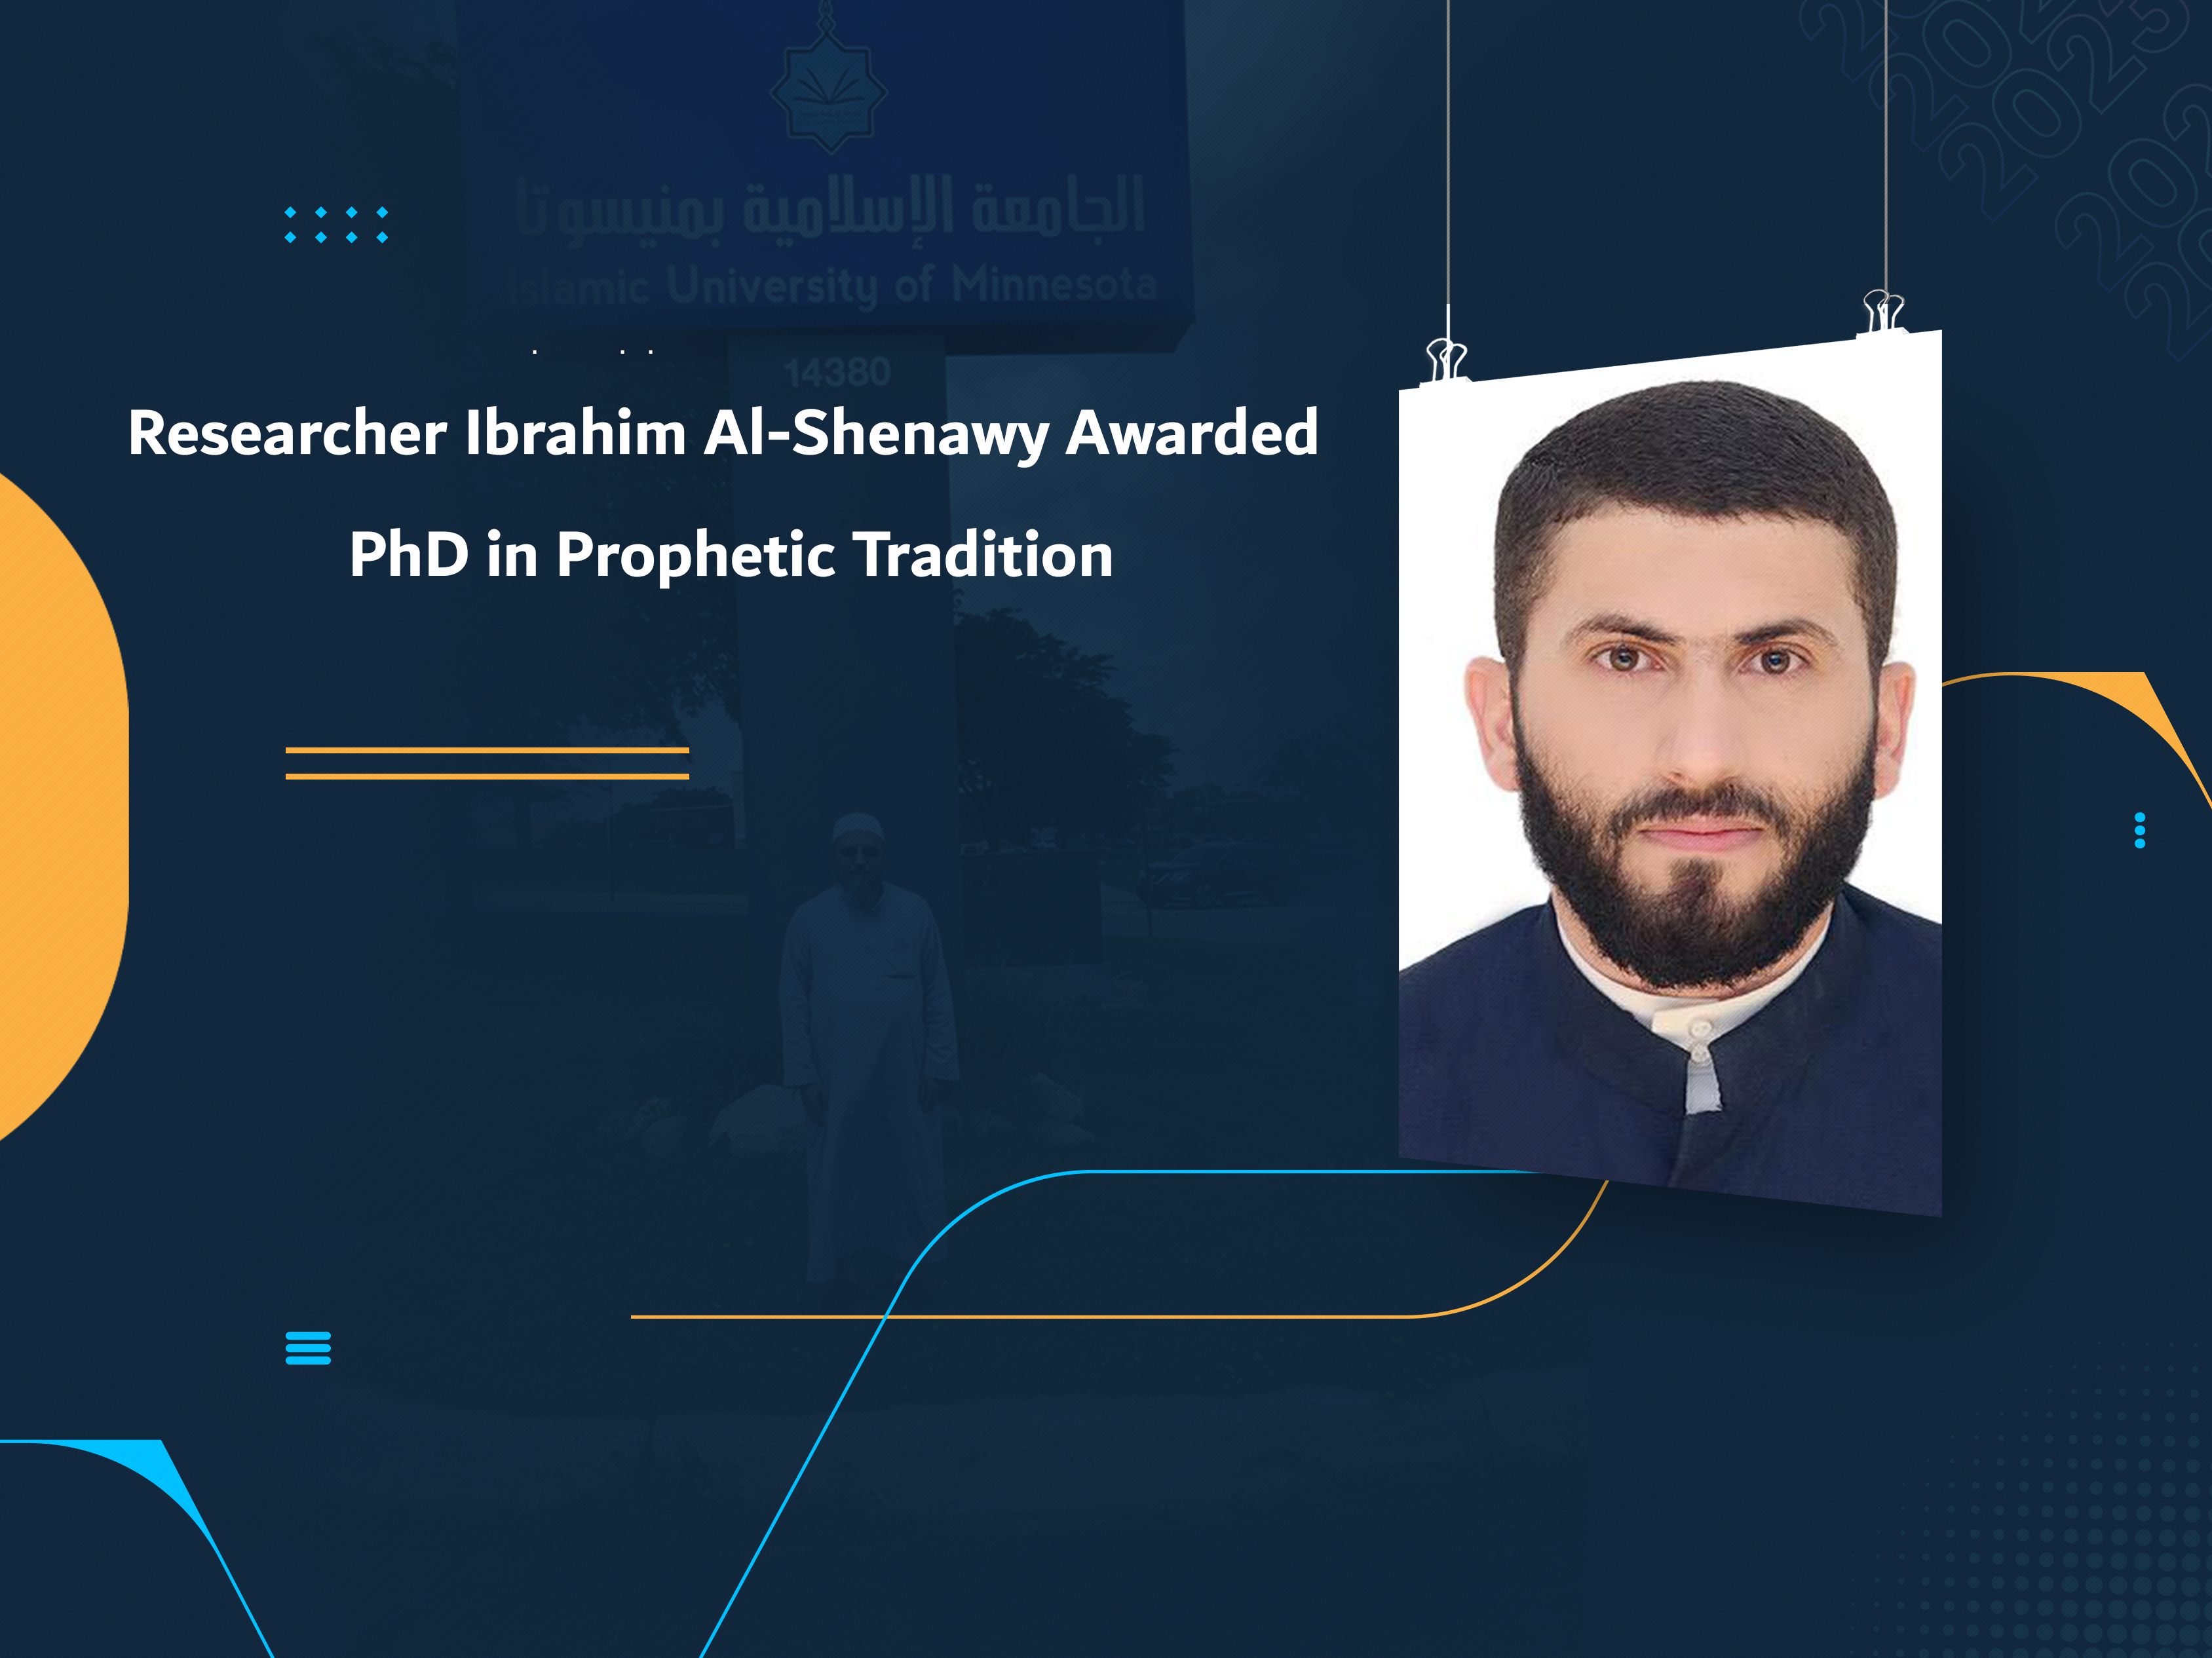 Researcher Ibrahim Al-Shenawy Awarded PhD in Prophetic Tradition